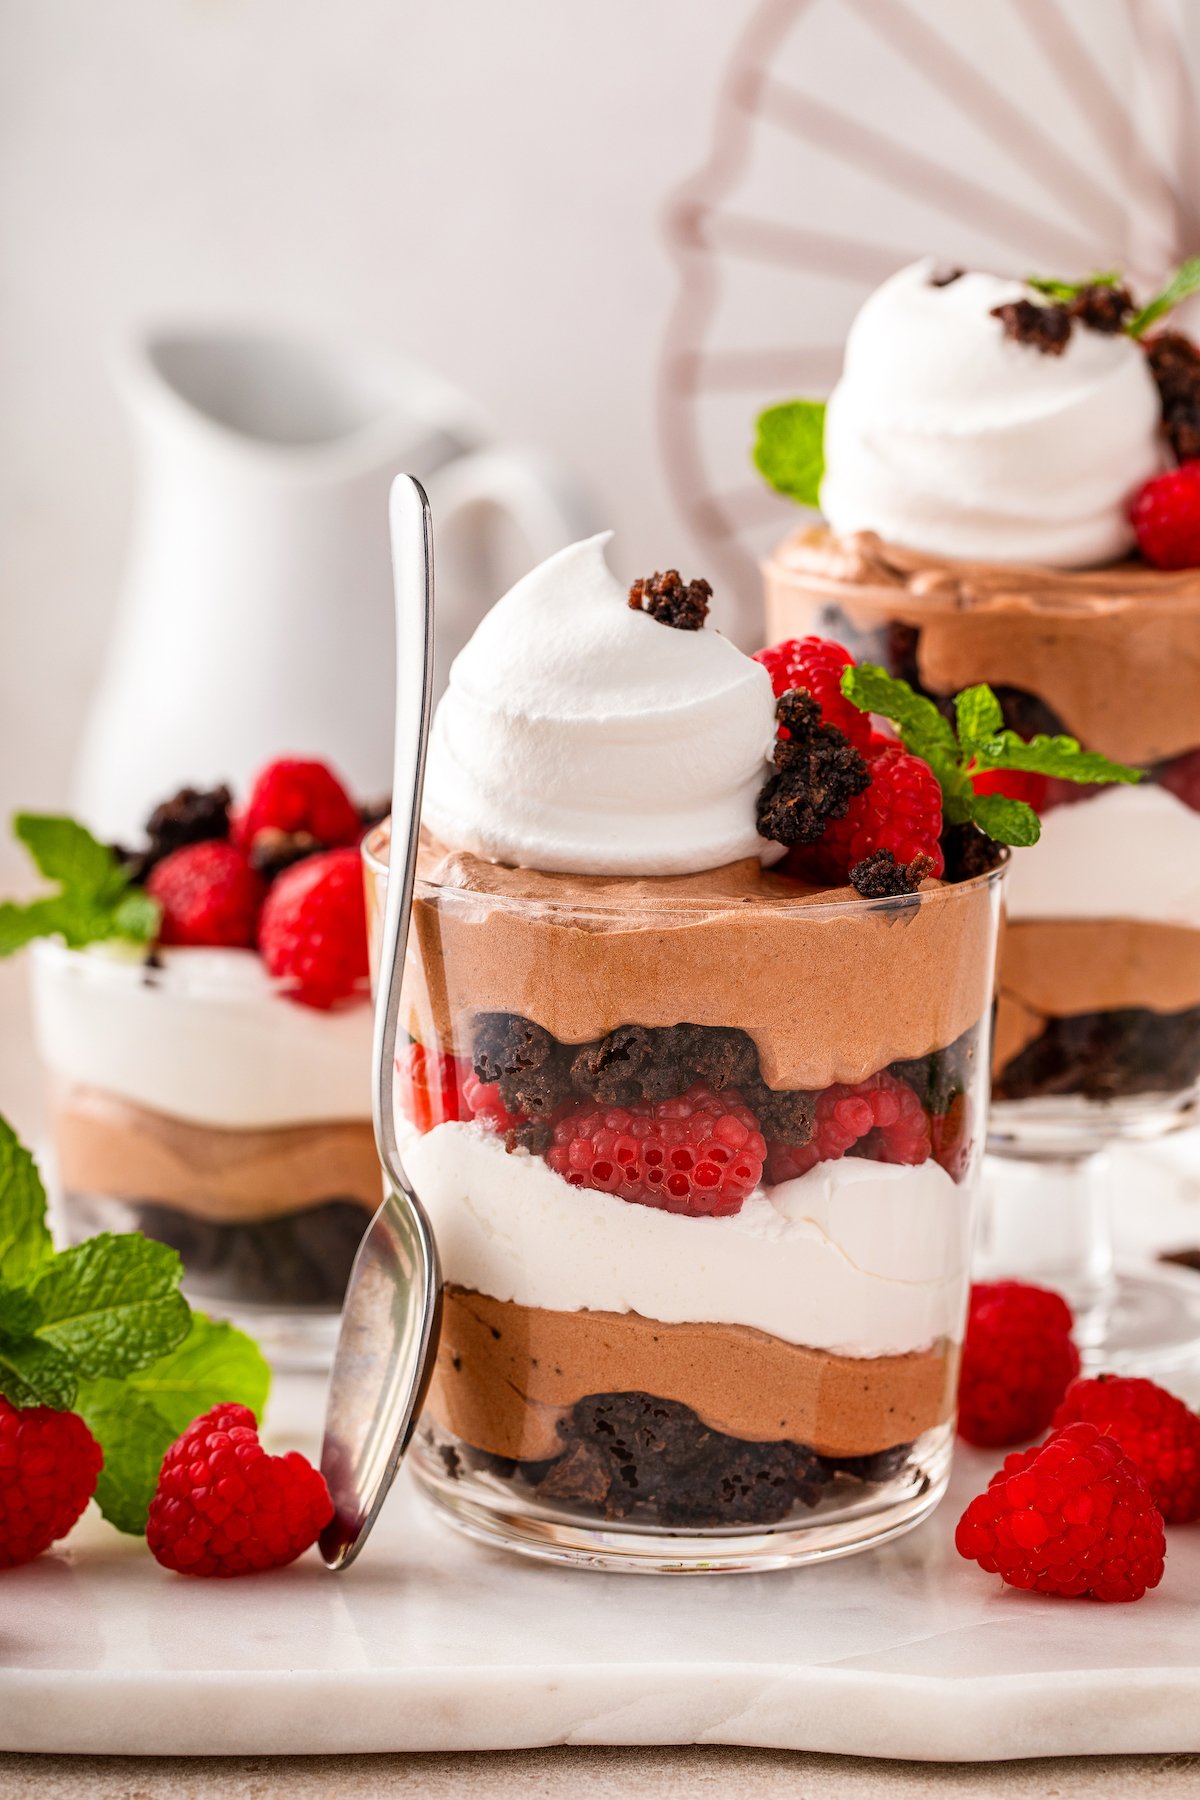 Brownie trifle with layers of chocolate pudding, raspberries and whipped creamy in a trifle bowl.